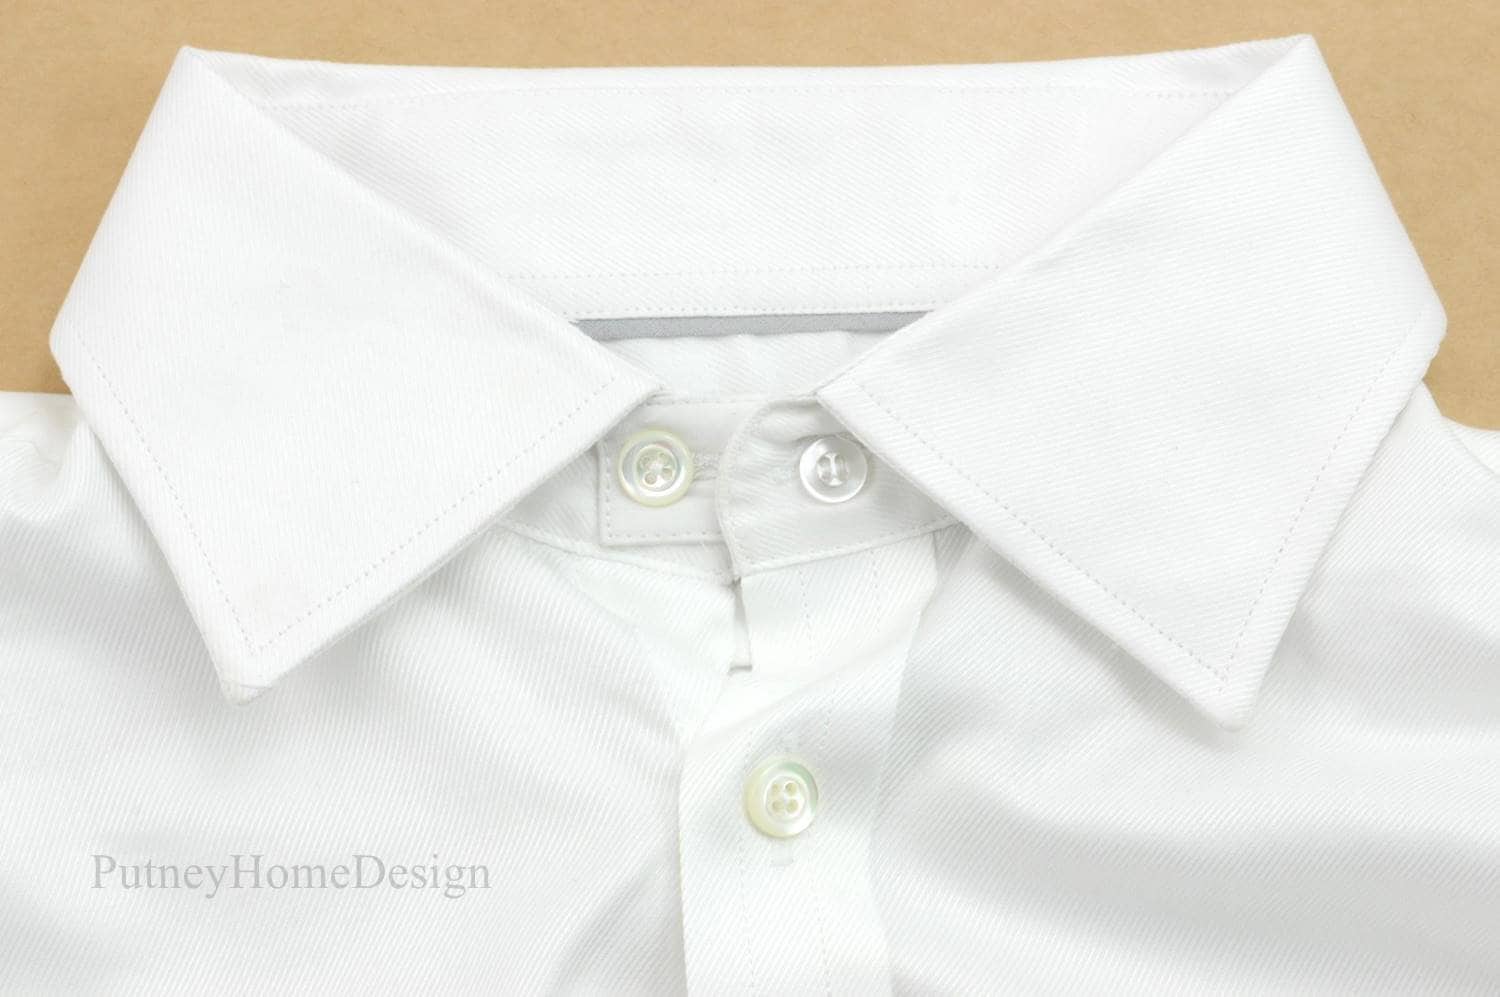 Collar Extenders For Men's Shirts Button Extender For Pants - Temu